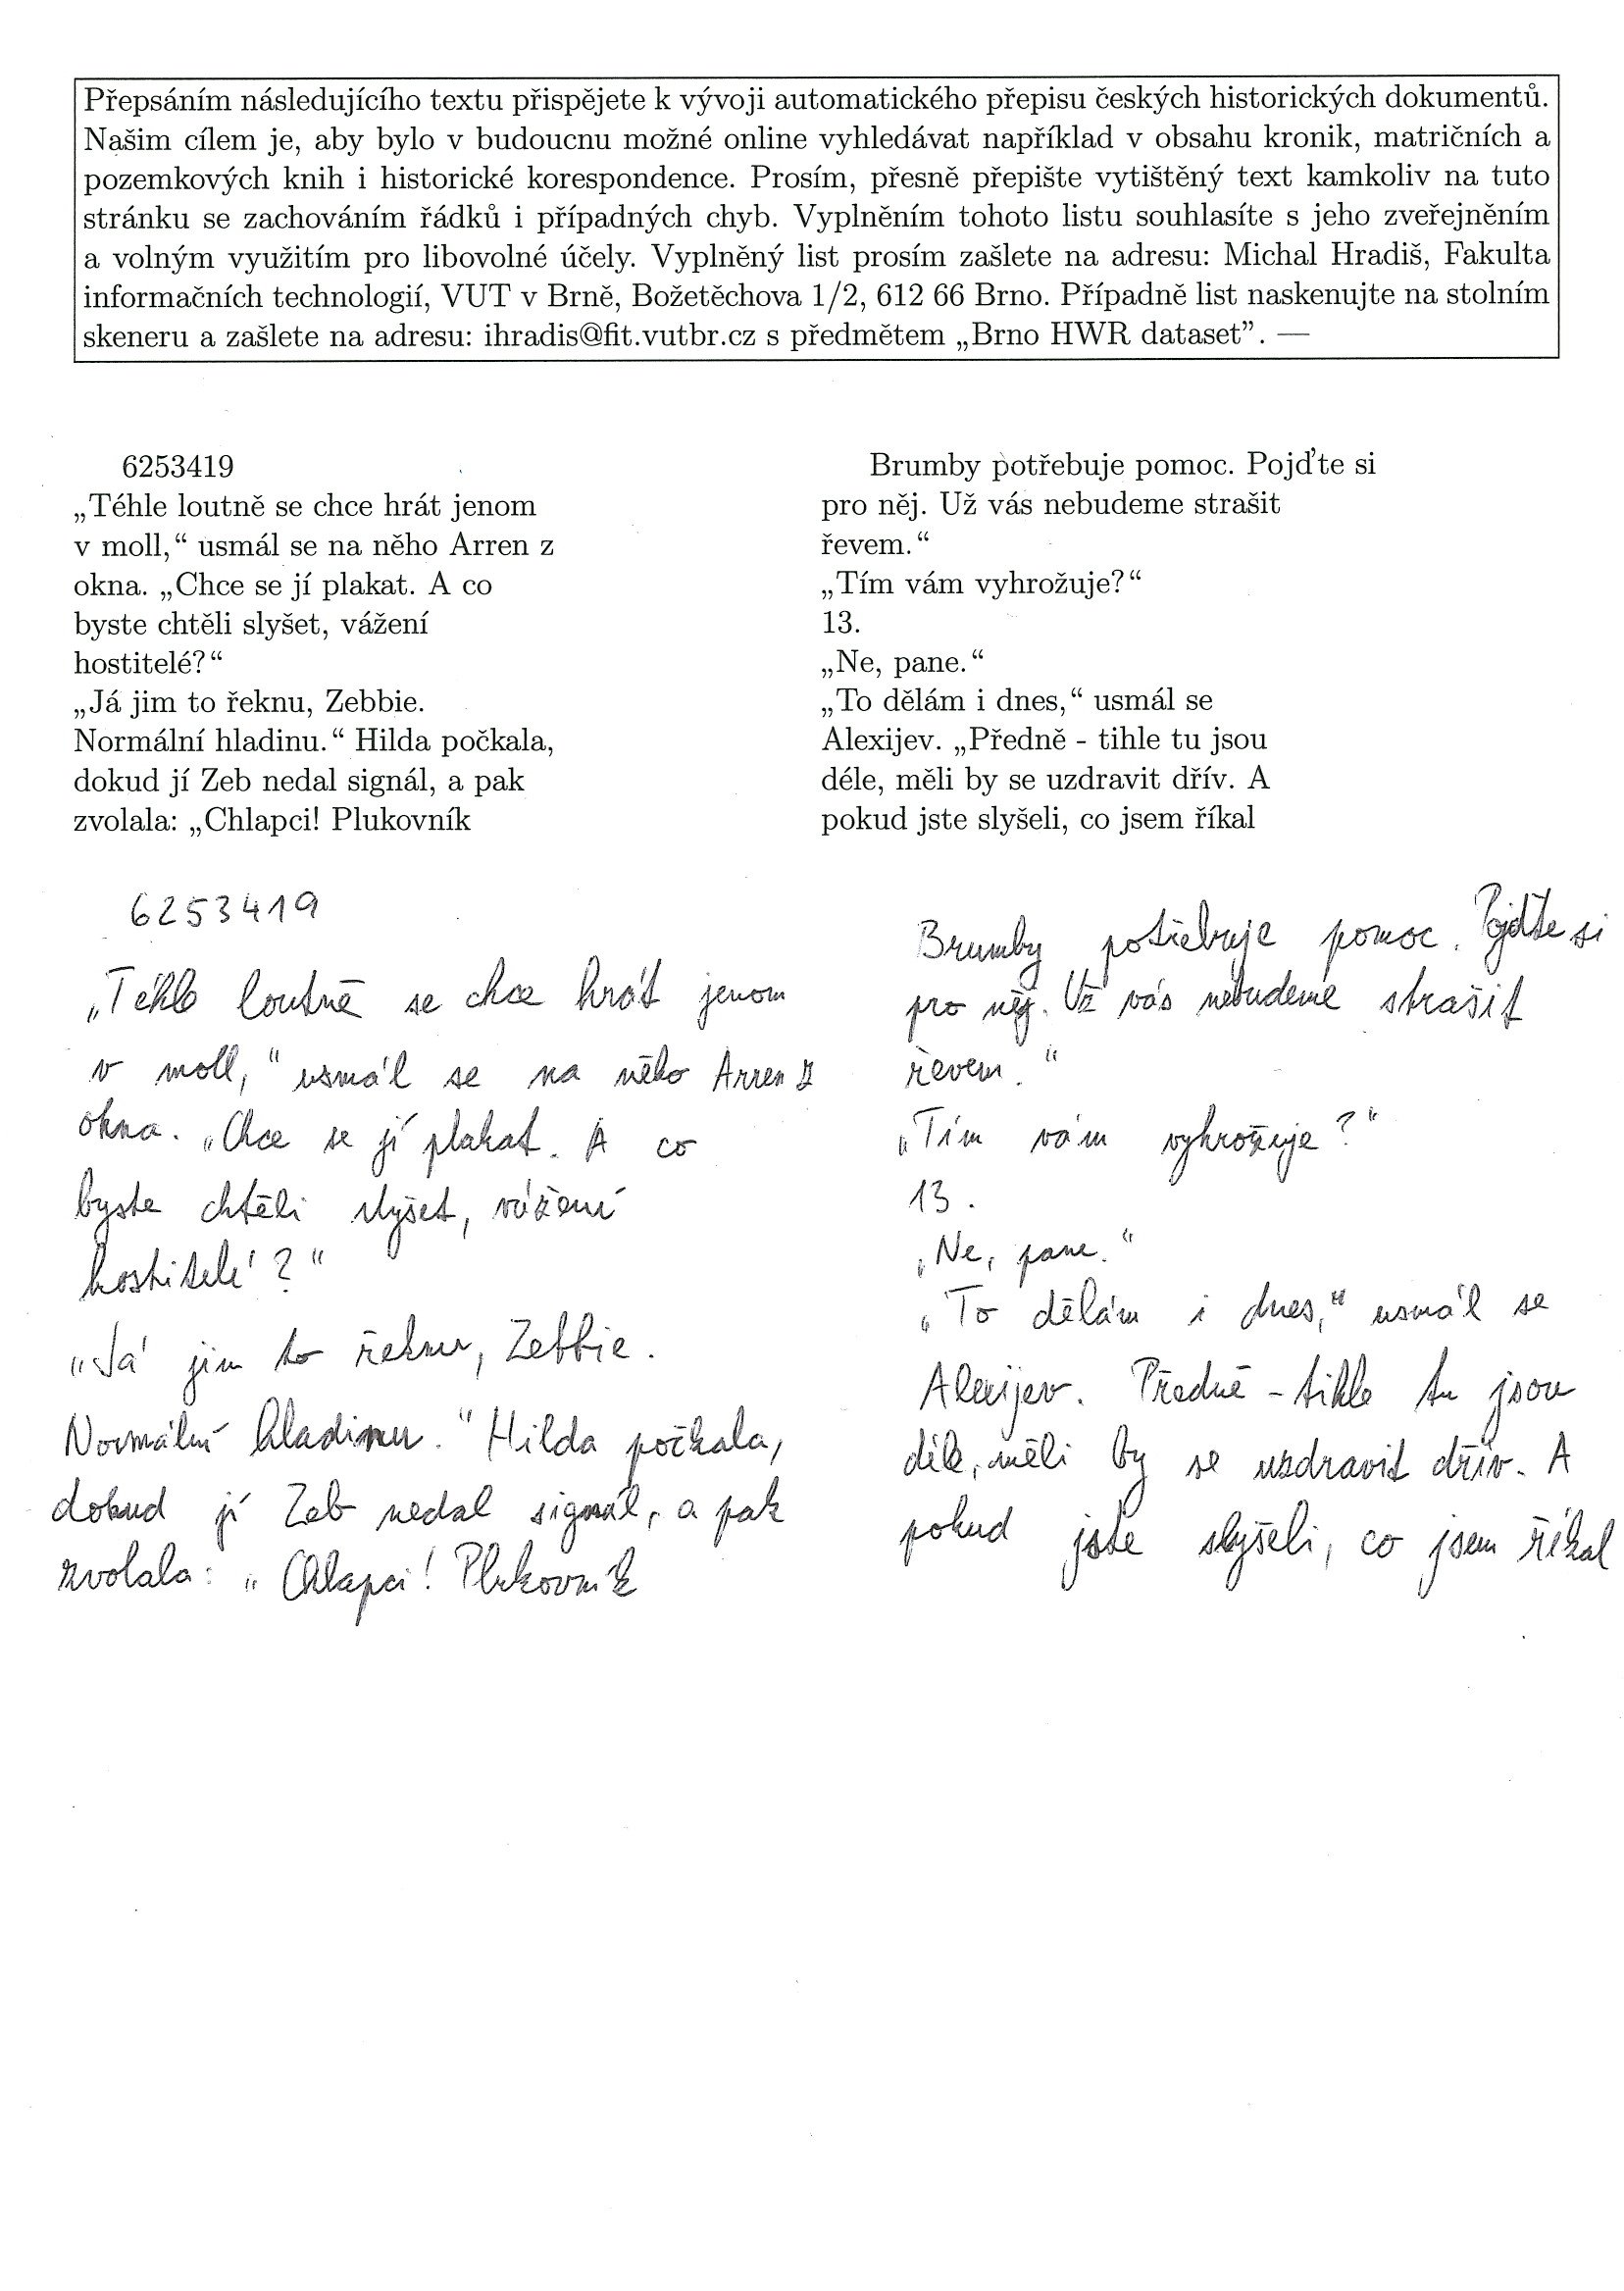 Example of transcribed page.